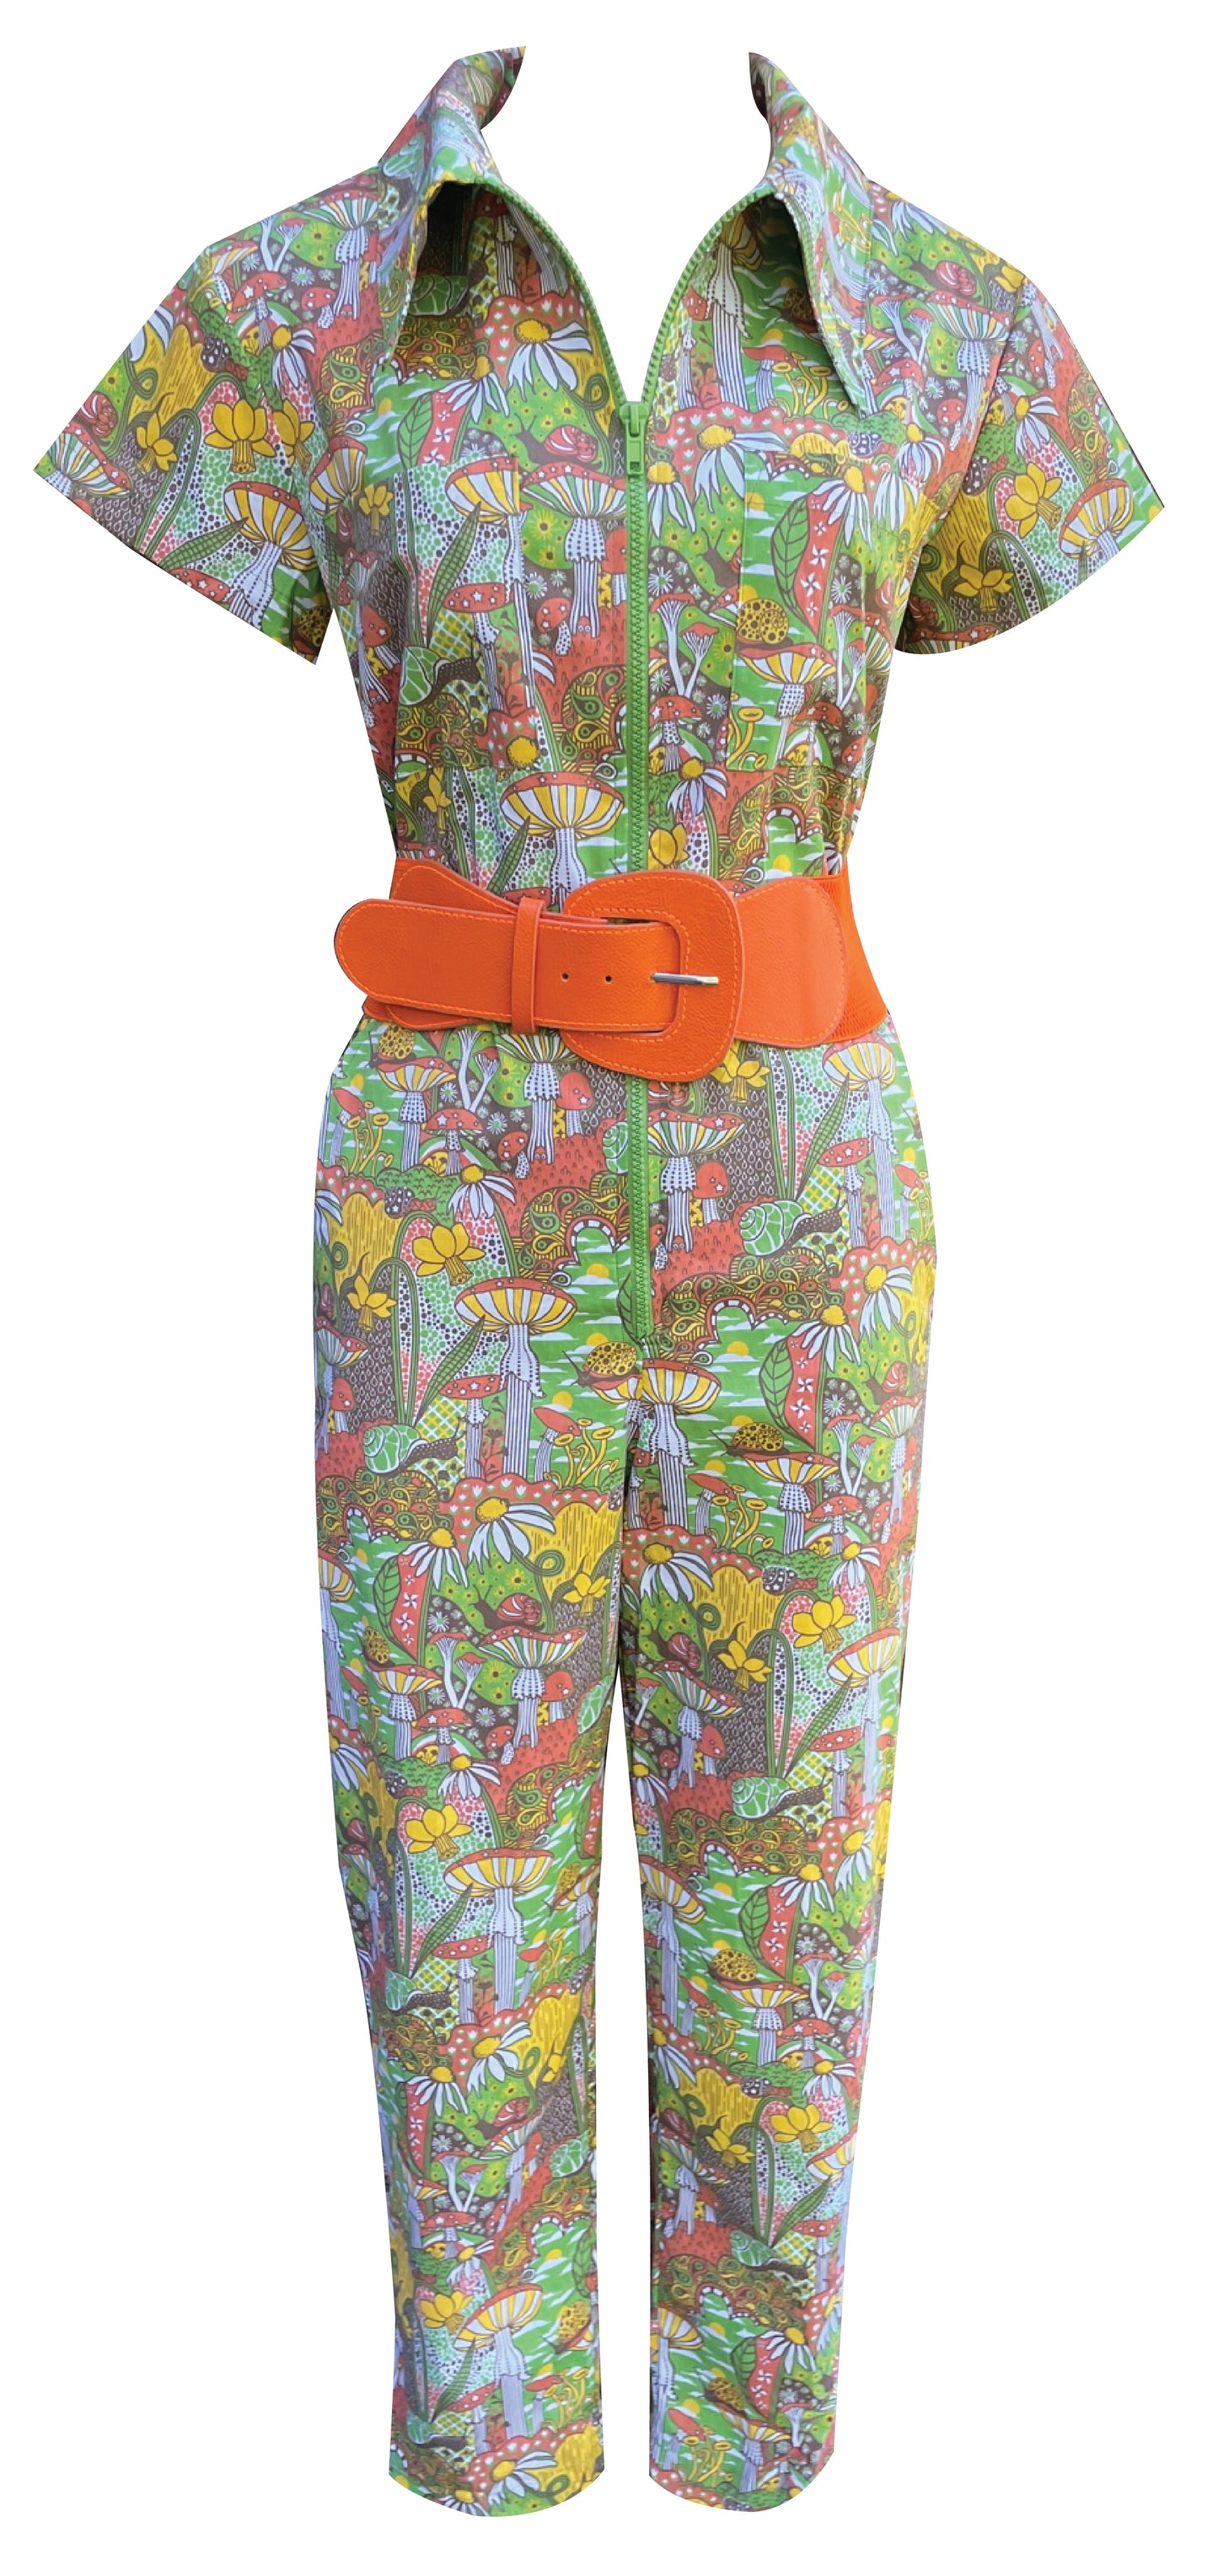 Collared, zip front psychedelic jumpsuit in 70s colors, with big orange belt